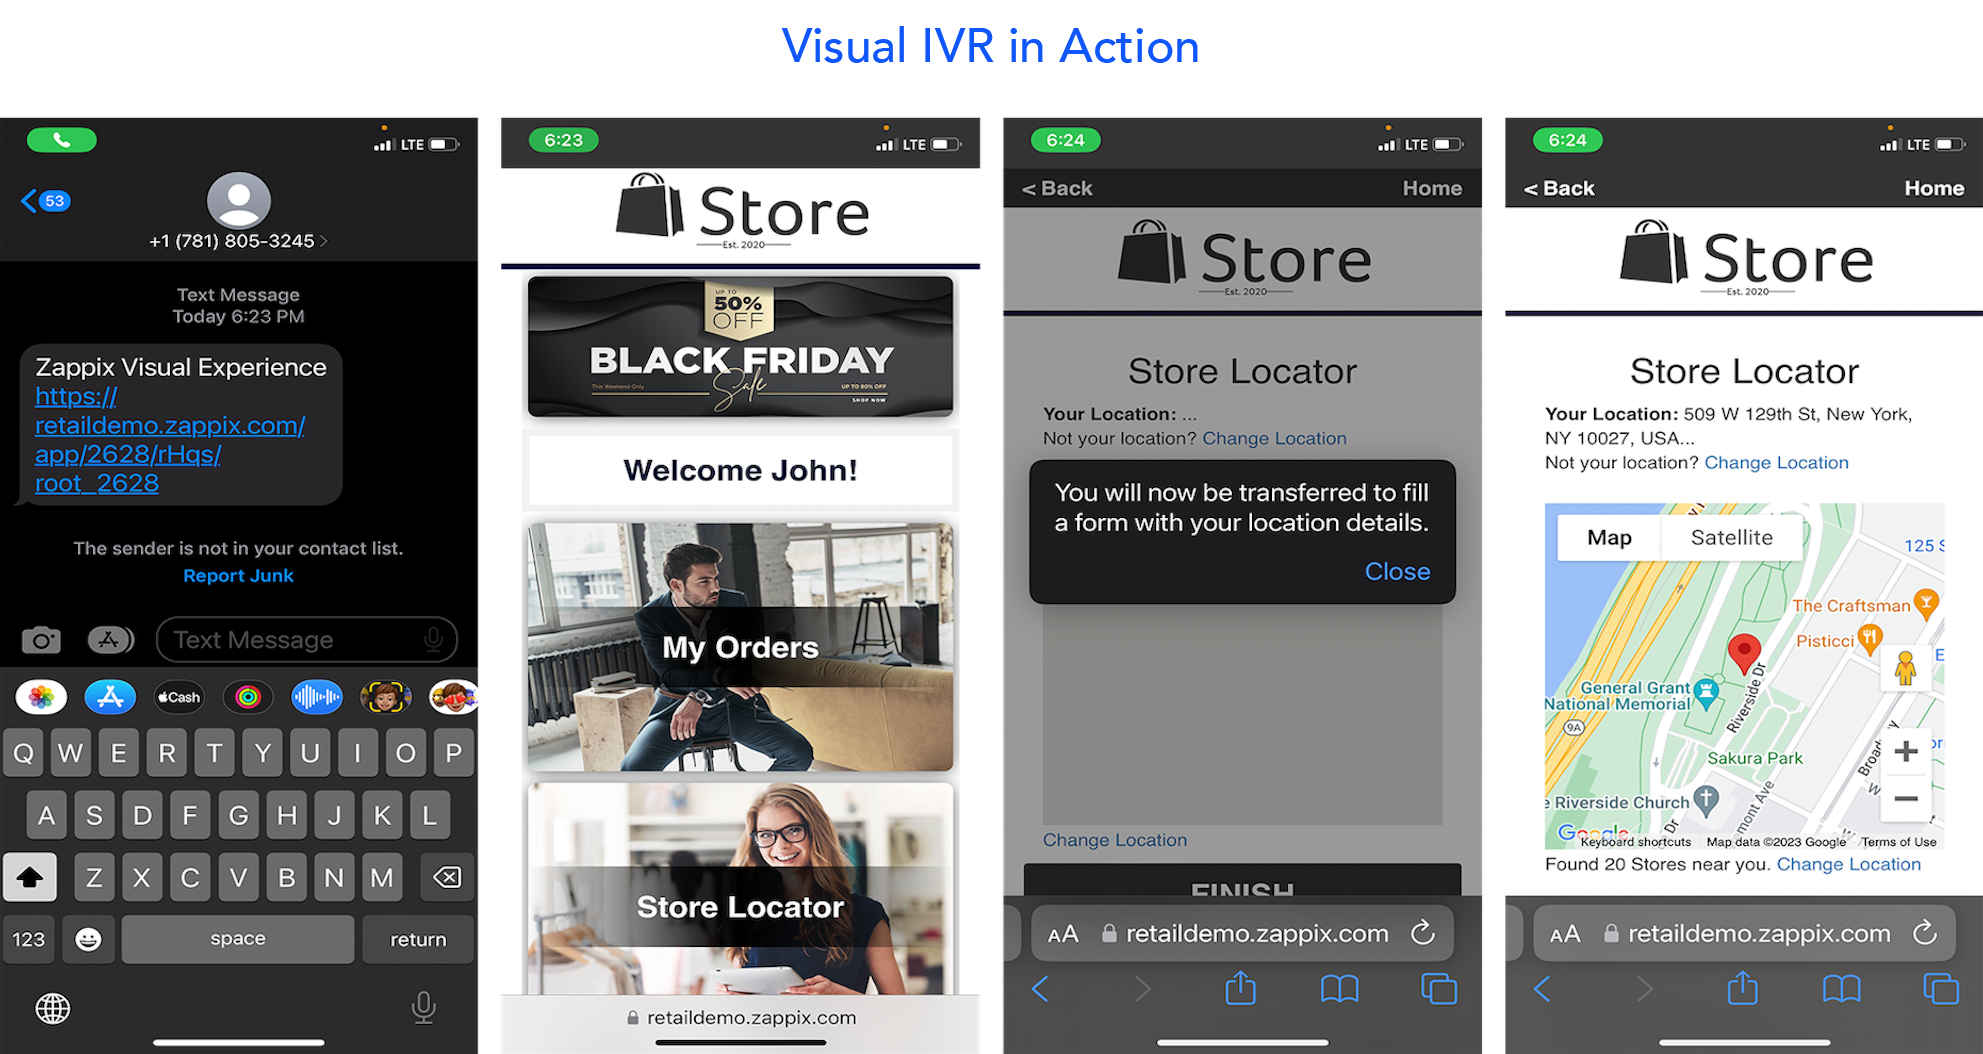 Visual IVR in Action